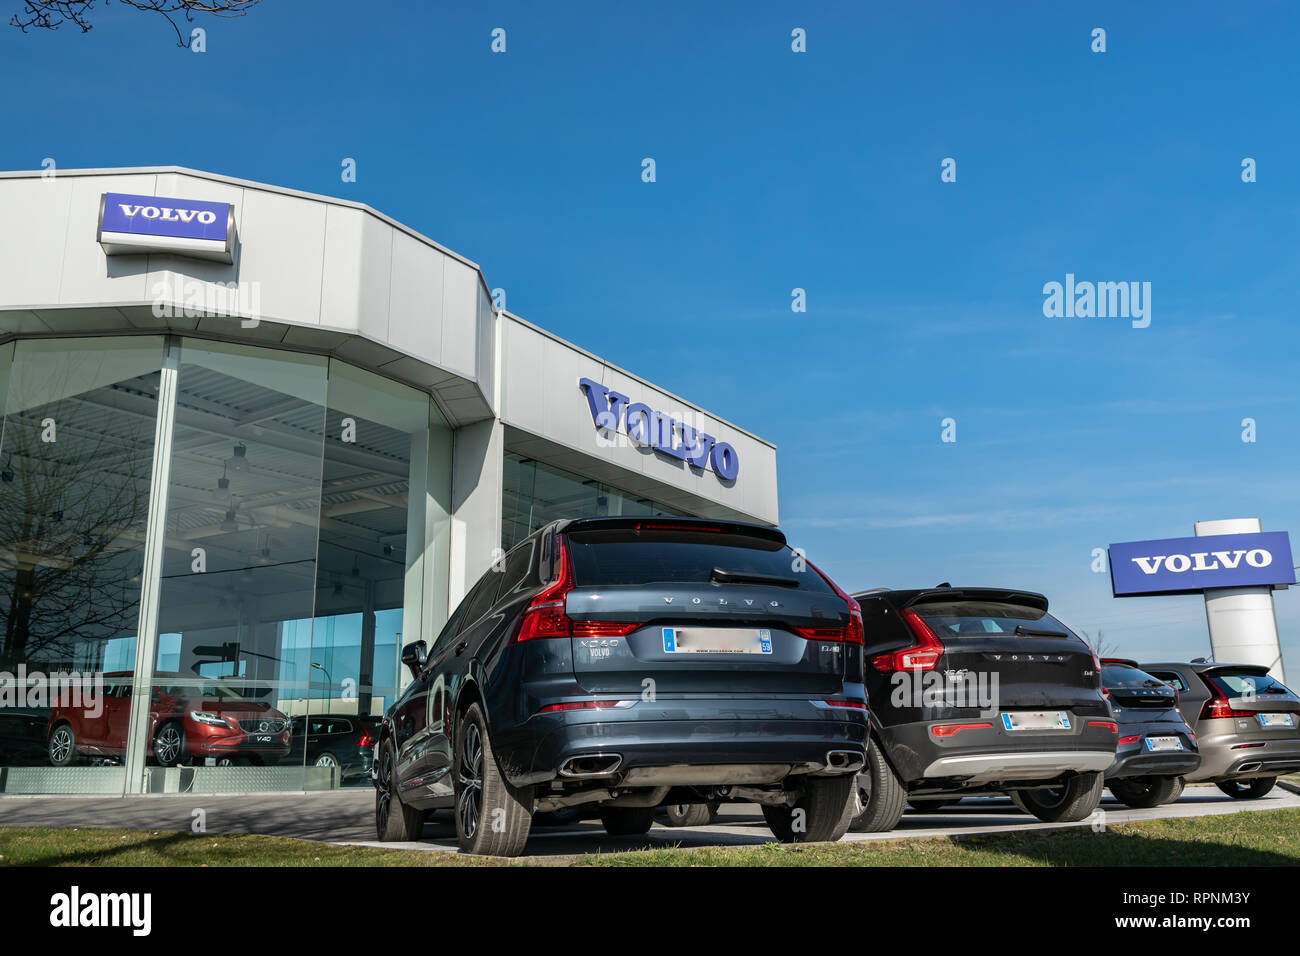 RONCQ,FRANCE-February20,2019: View of the Volvo brand dealership store on a blue sky background. Stock Photo